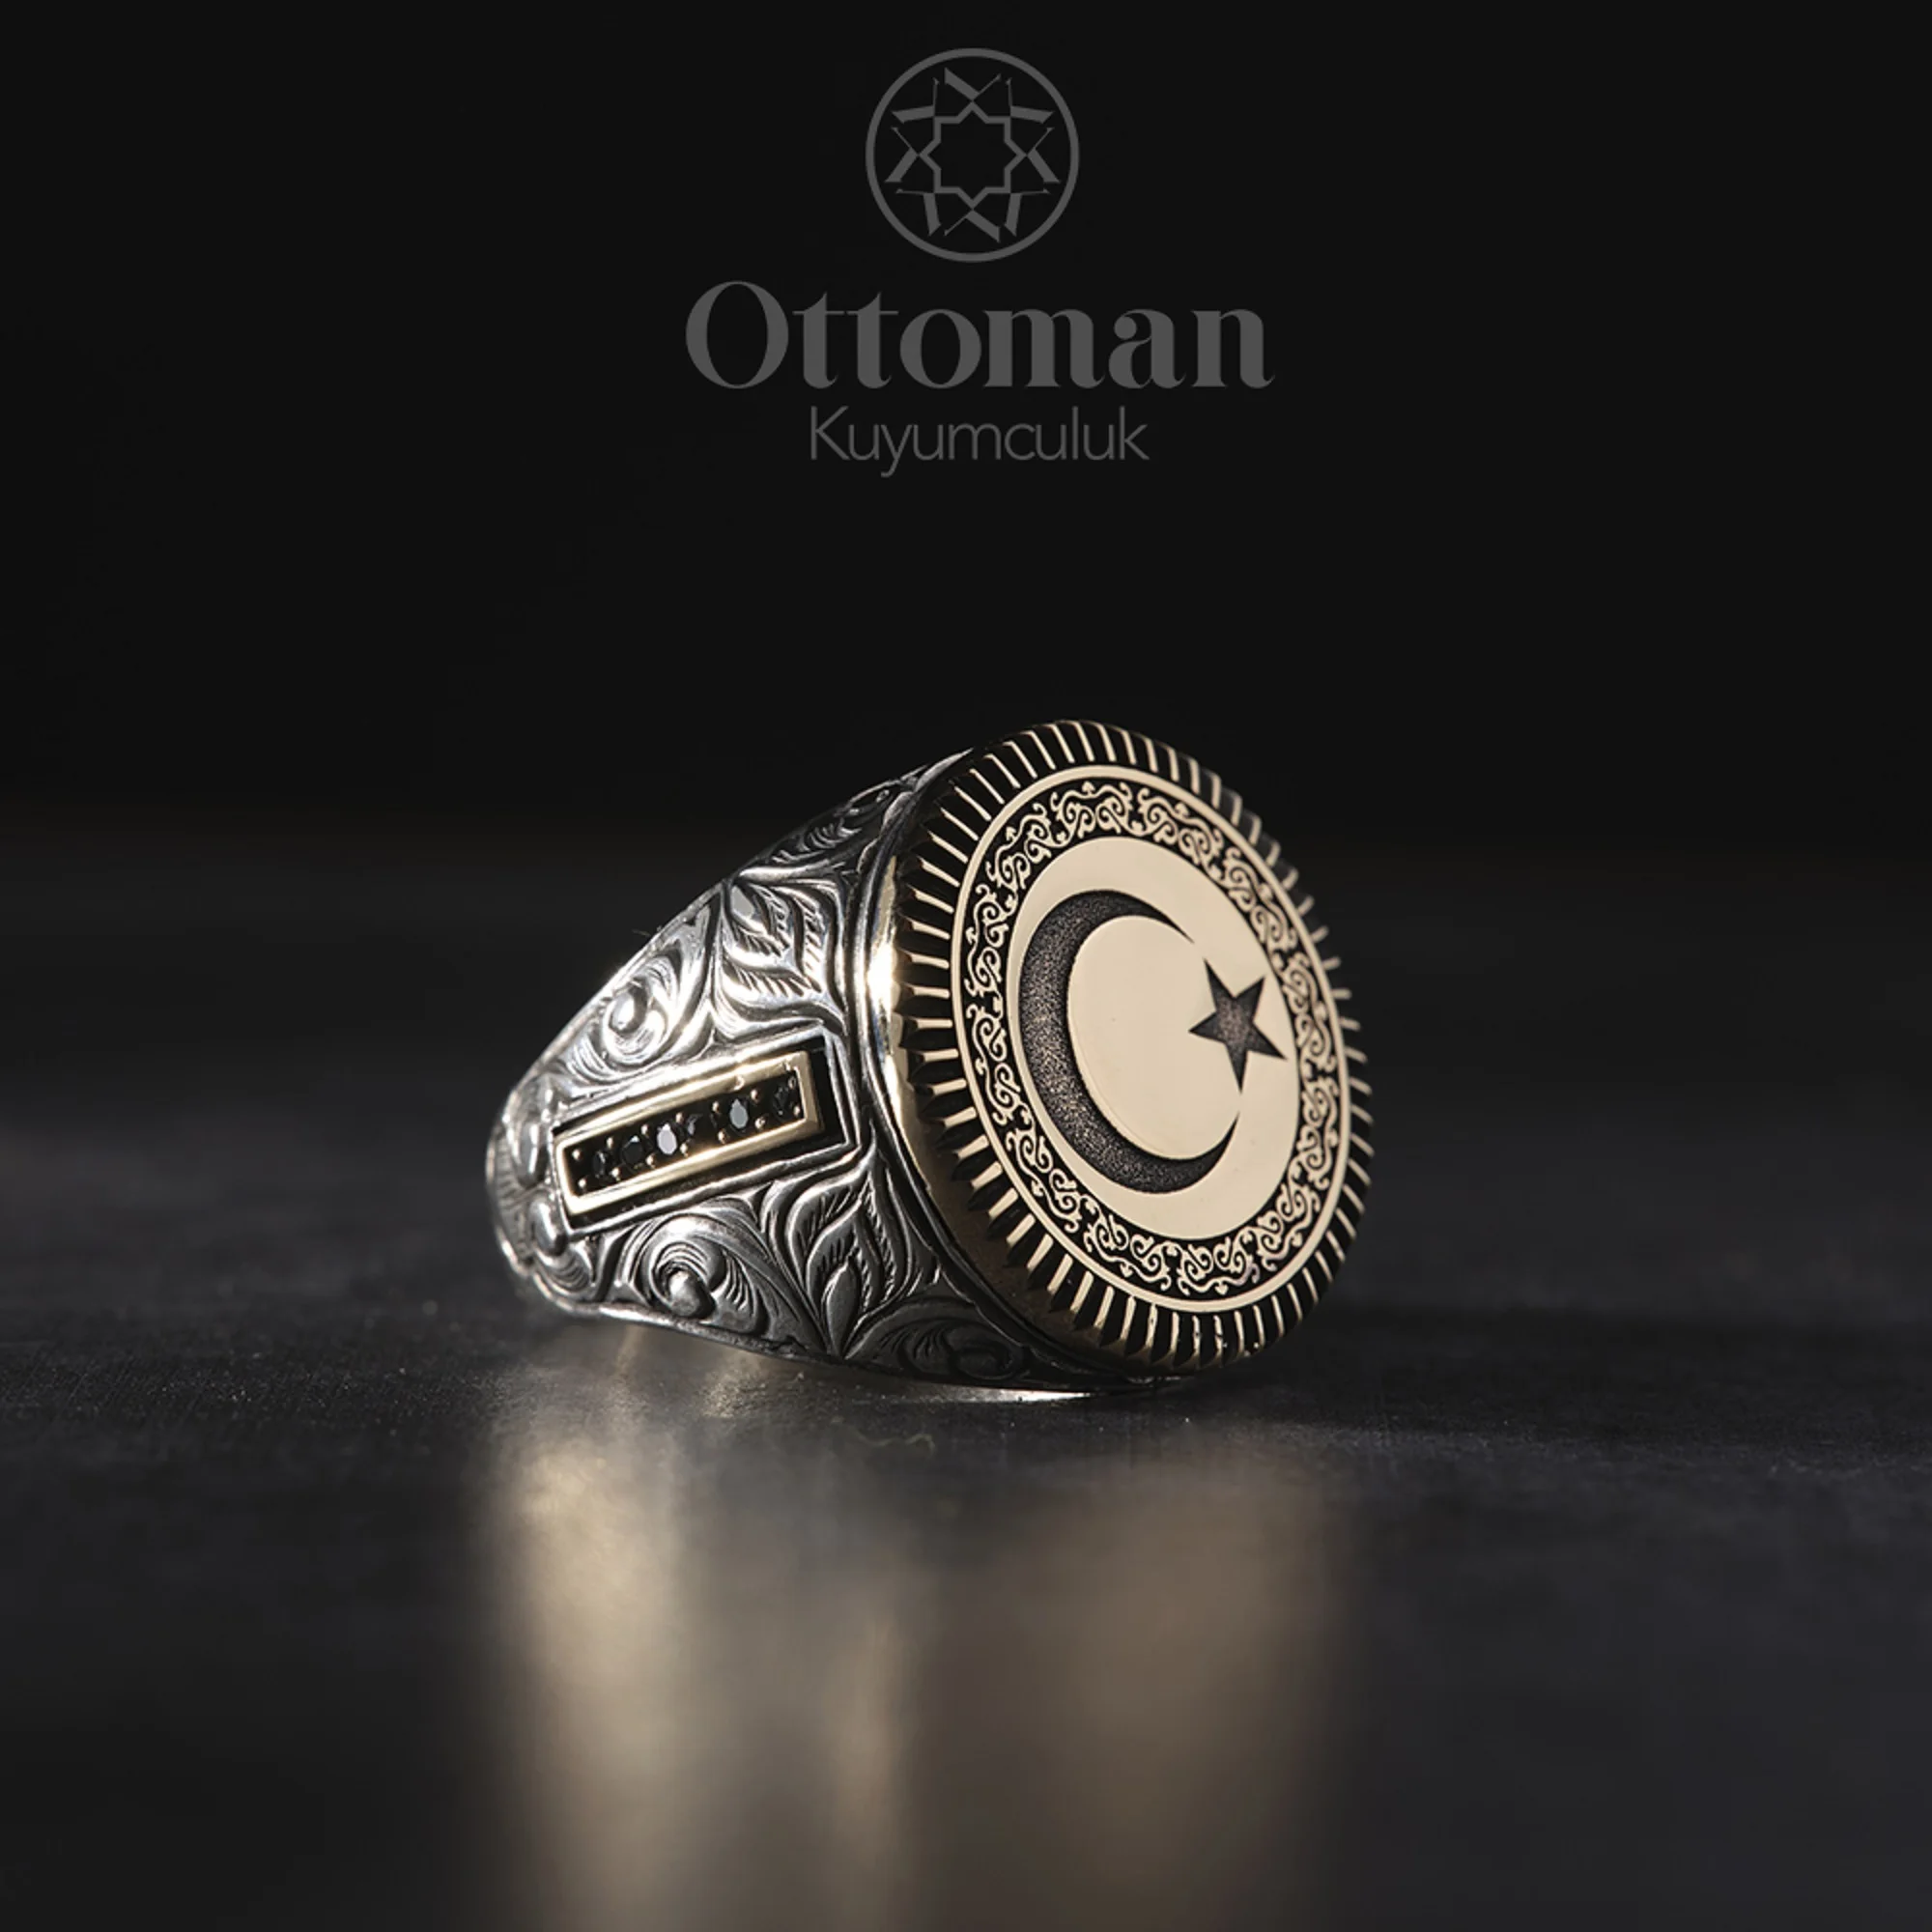 Engraving Patterned Moon and Star Men's Ring Model Ottoman Jewelry Ring Men Turkish Hnadmade ring Adjustable Men Rİngs